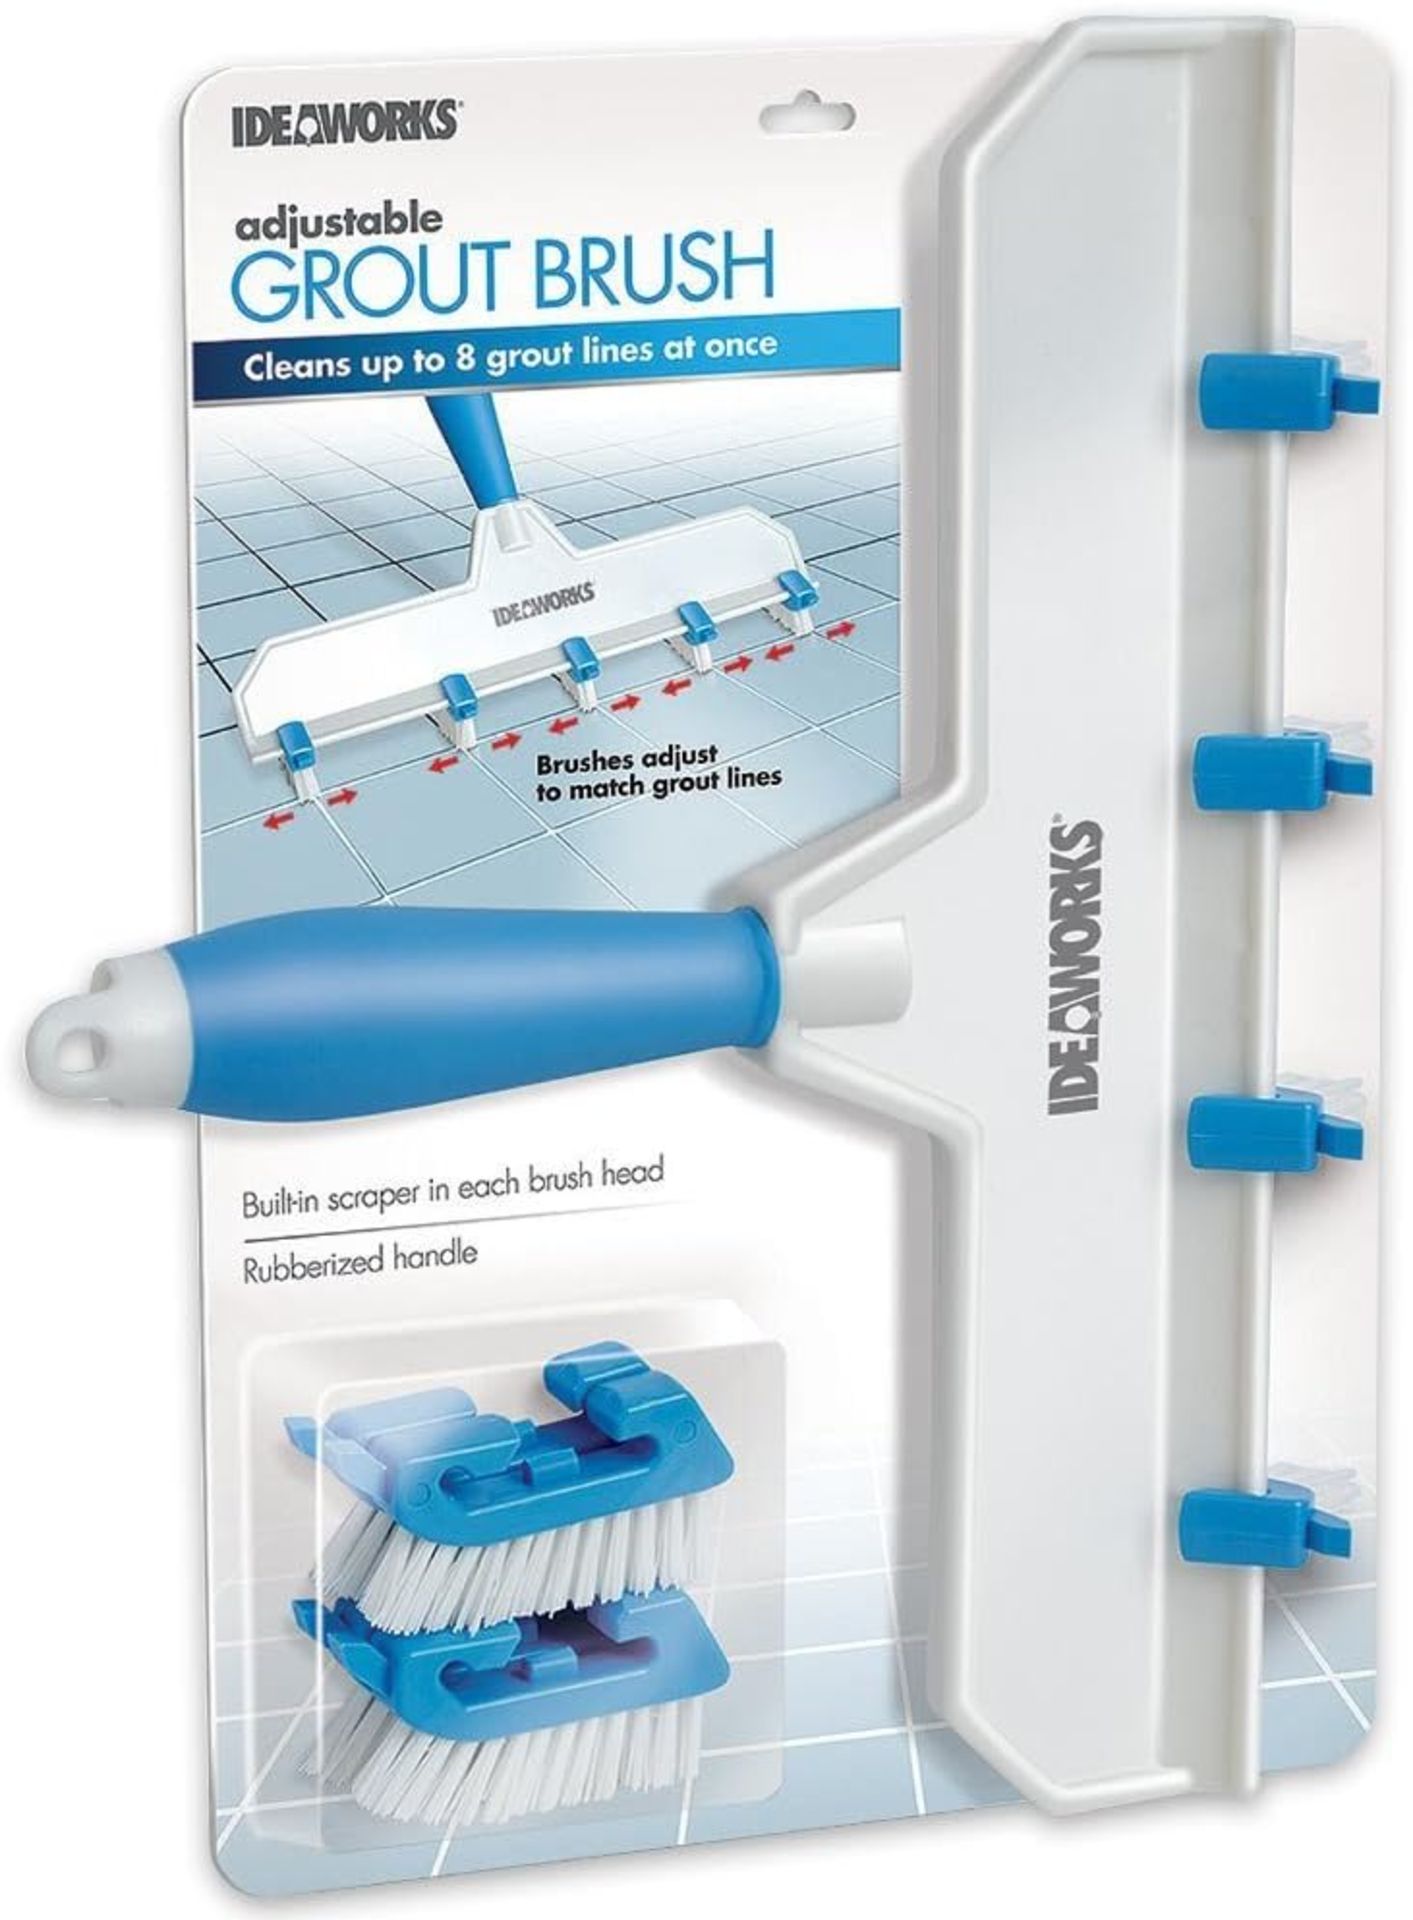 15x BRAND NEW IDEAWORKS Adjustable Grout Cleaning Brush for Tiles. RRP £16.95 EACH. Rubberised